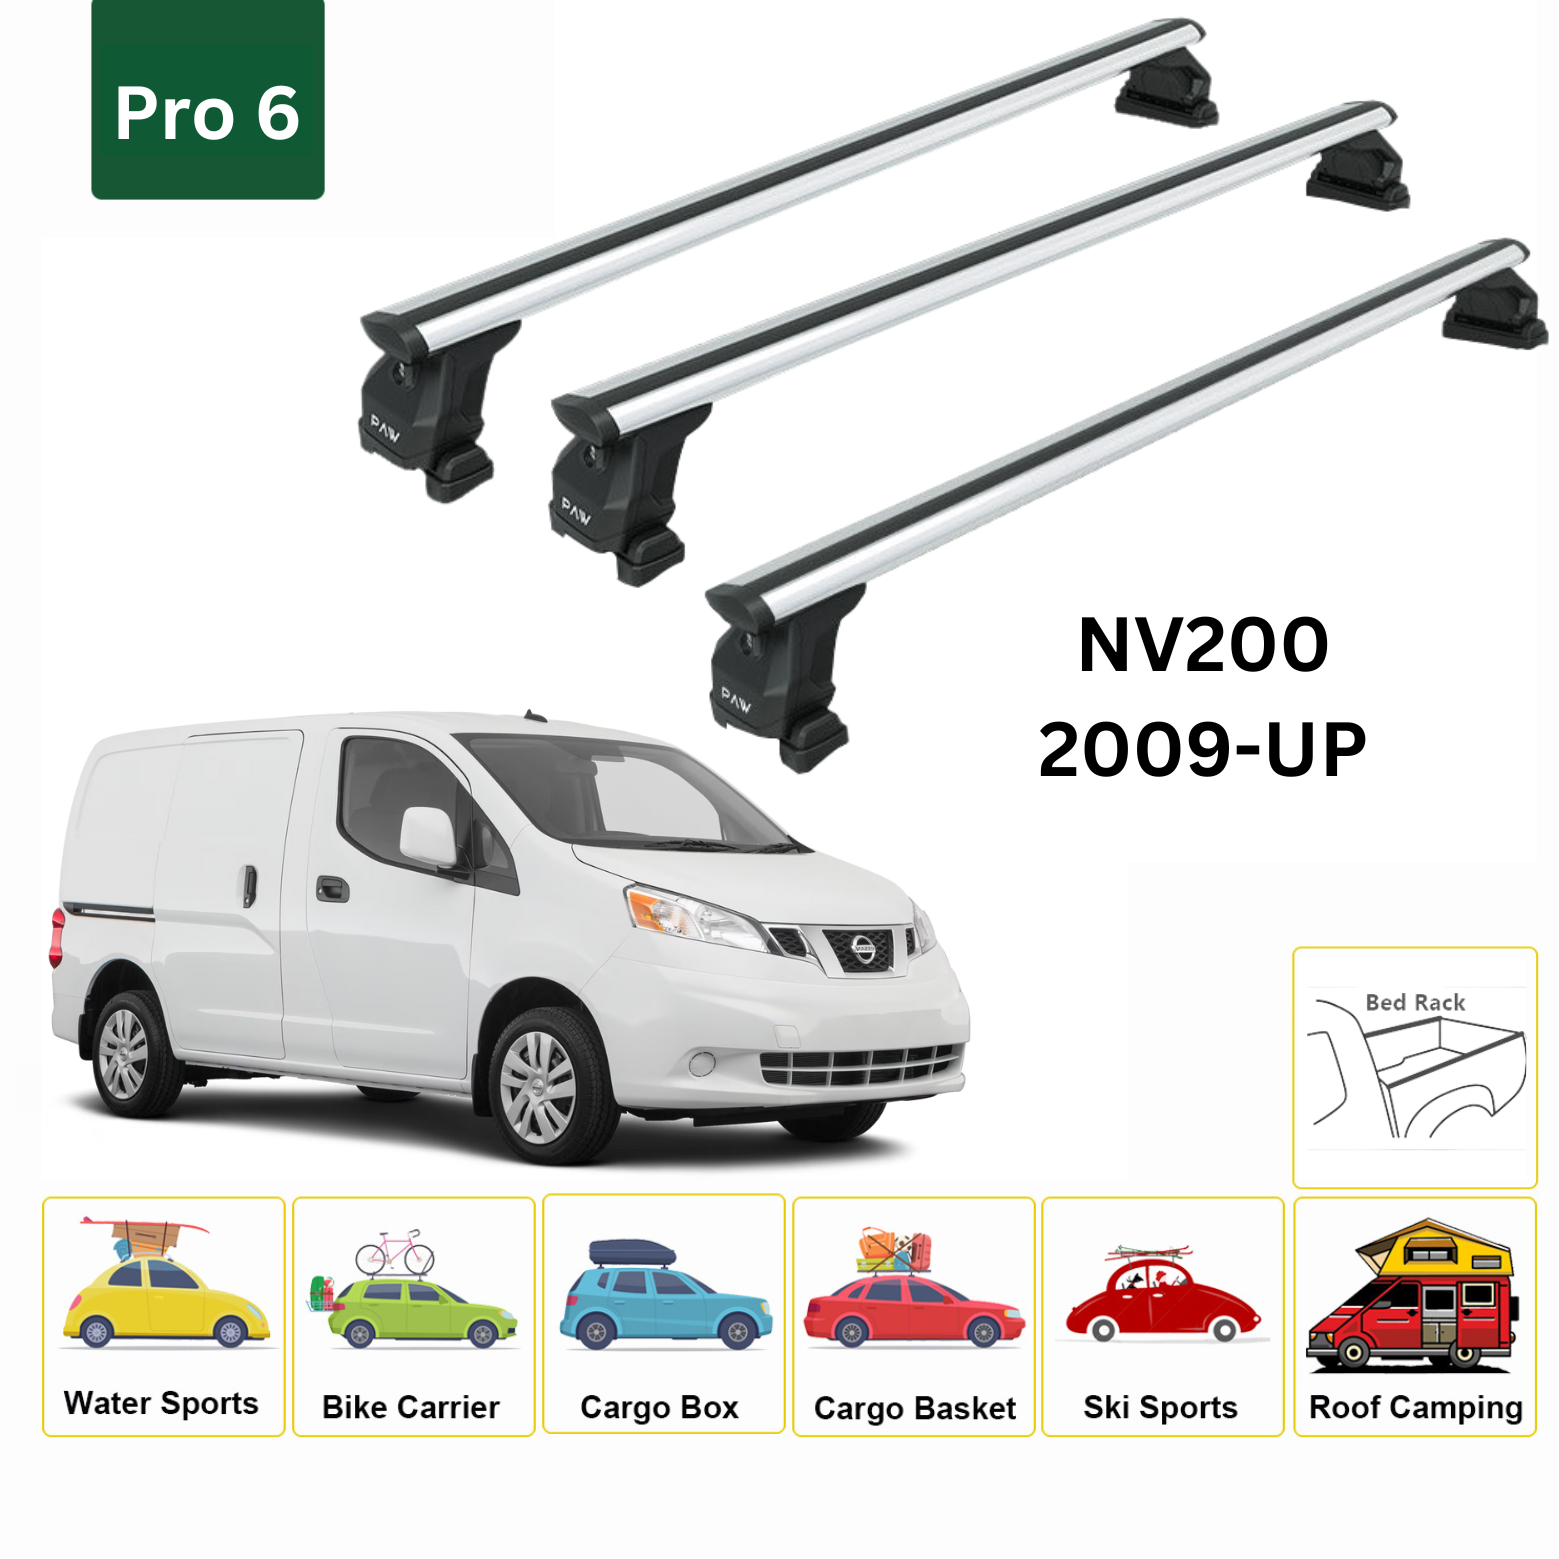 For Nissan NV200 2009-Up 3Qty Roof Rack Cross Bars Fix Point Pro 6 Alu Silver - 0